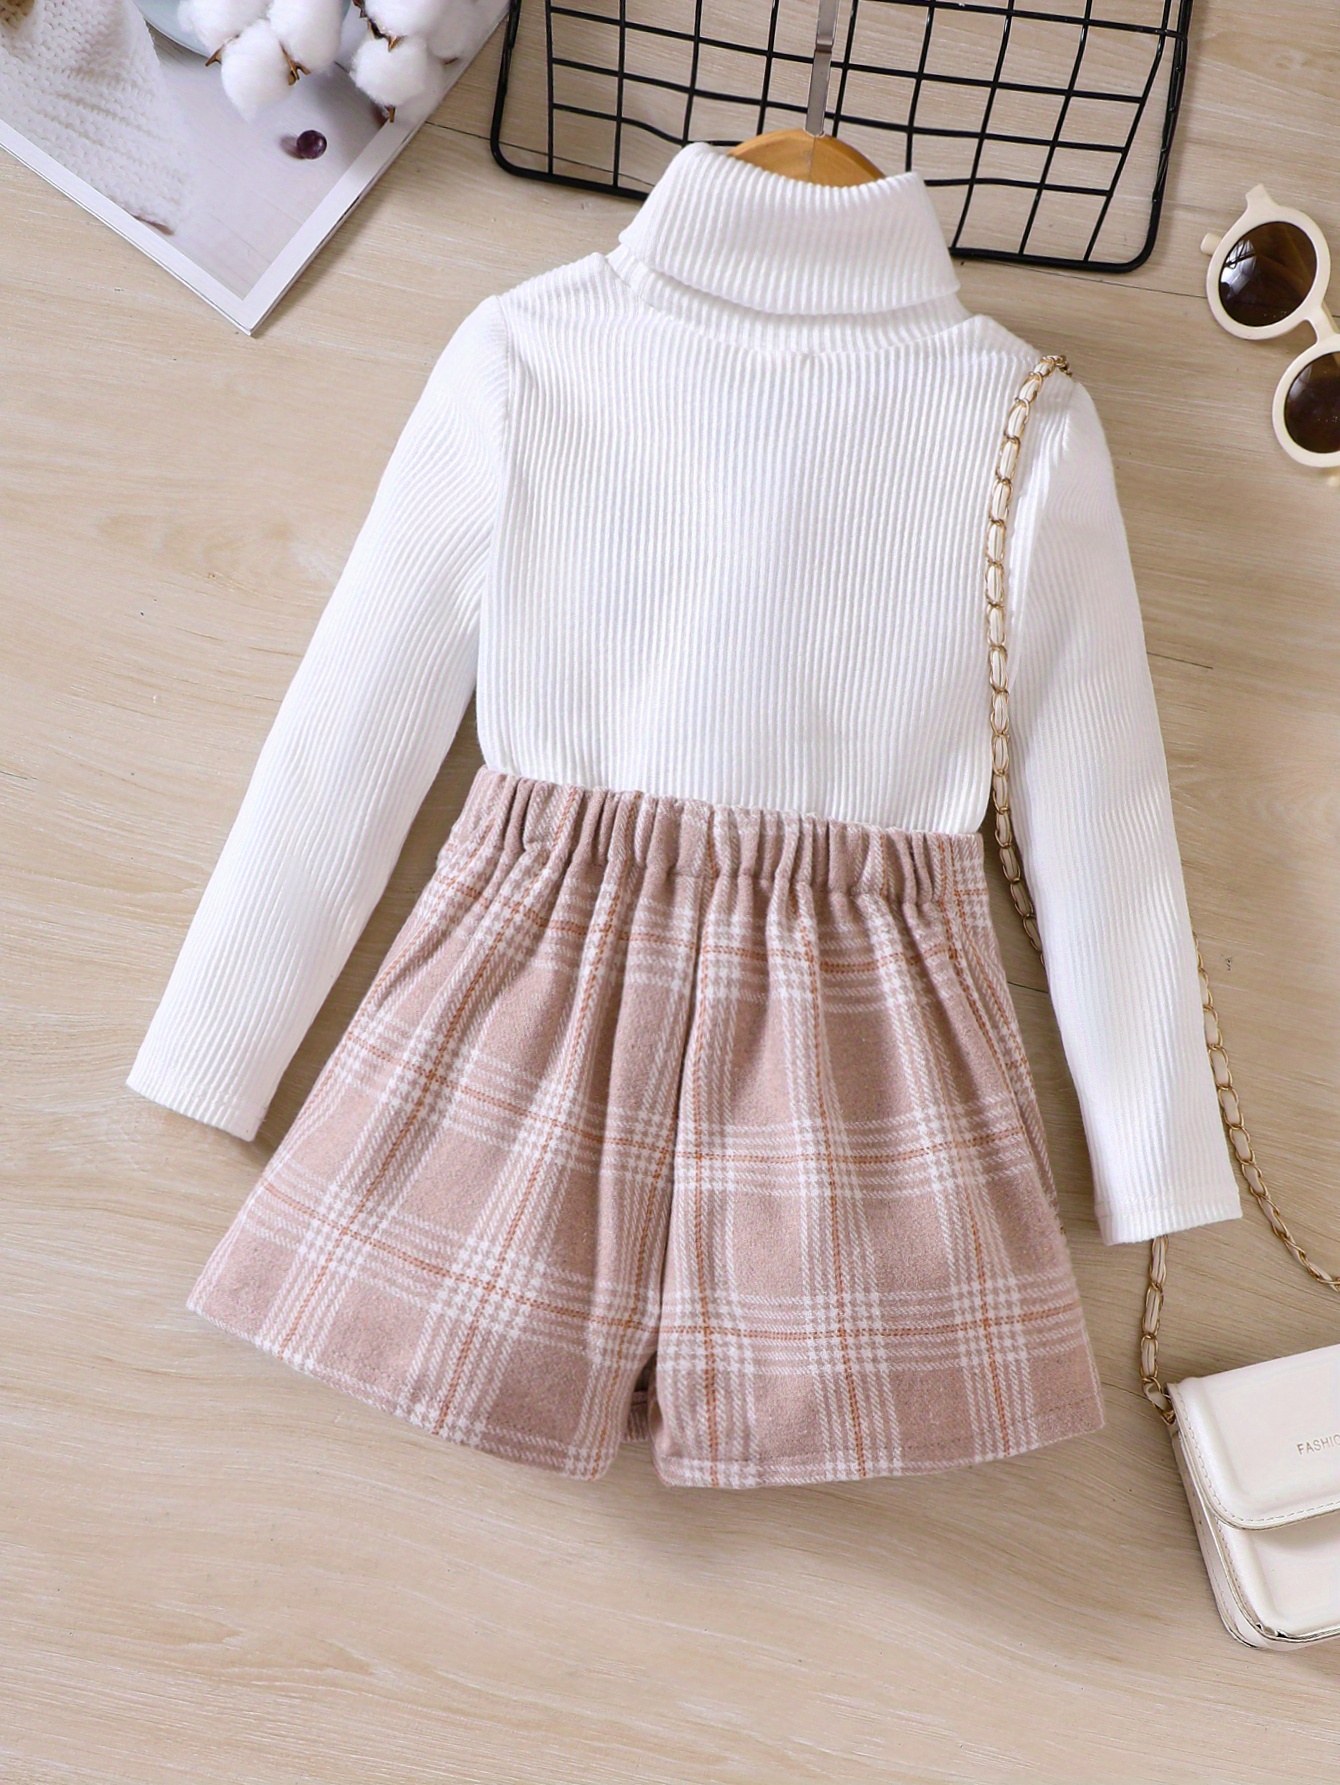 JDEFEG Toddler Little Girl Clothes Sweet Ruffles Long Sleeve Ribbed Tops  Plaid Skirts Bag Outfit Sets Cute Teen Girls Fashion Clothes White Size 100